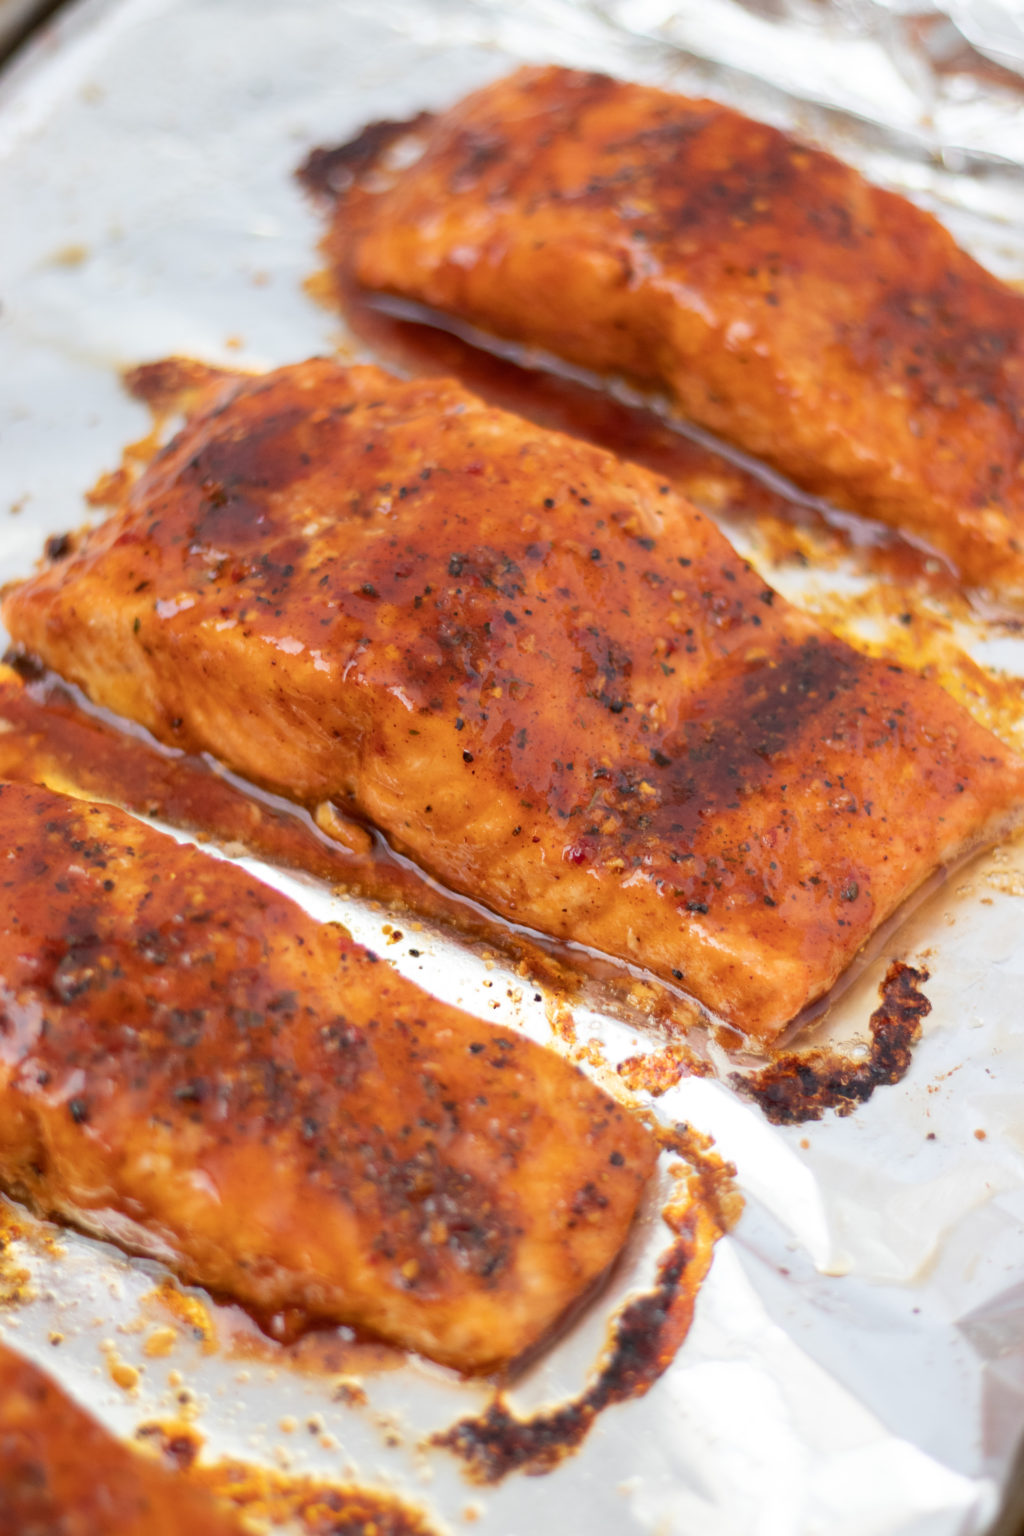 Maple-Barbecue Salmon (Oven or Grill) - The Grove Bend Kitchen